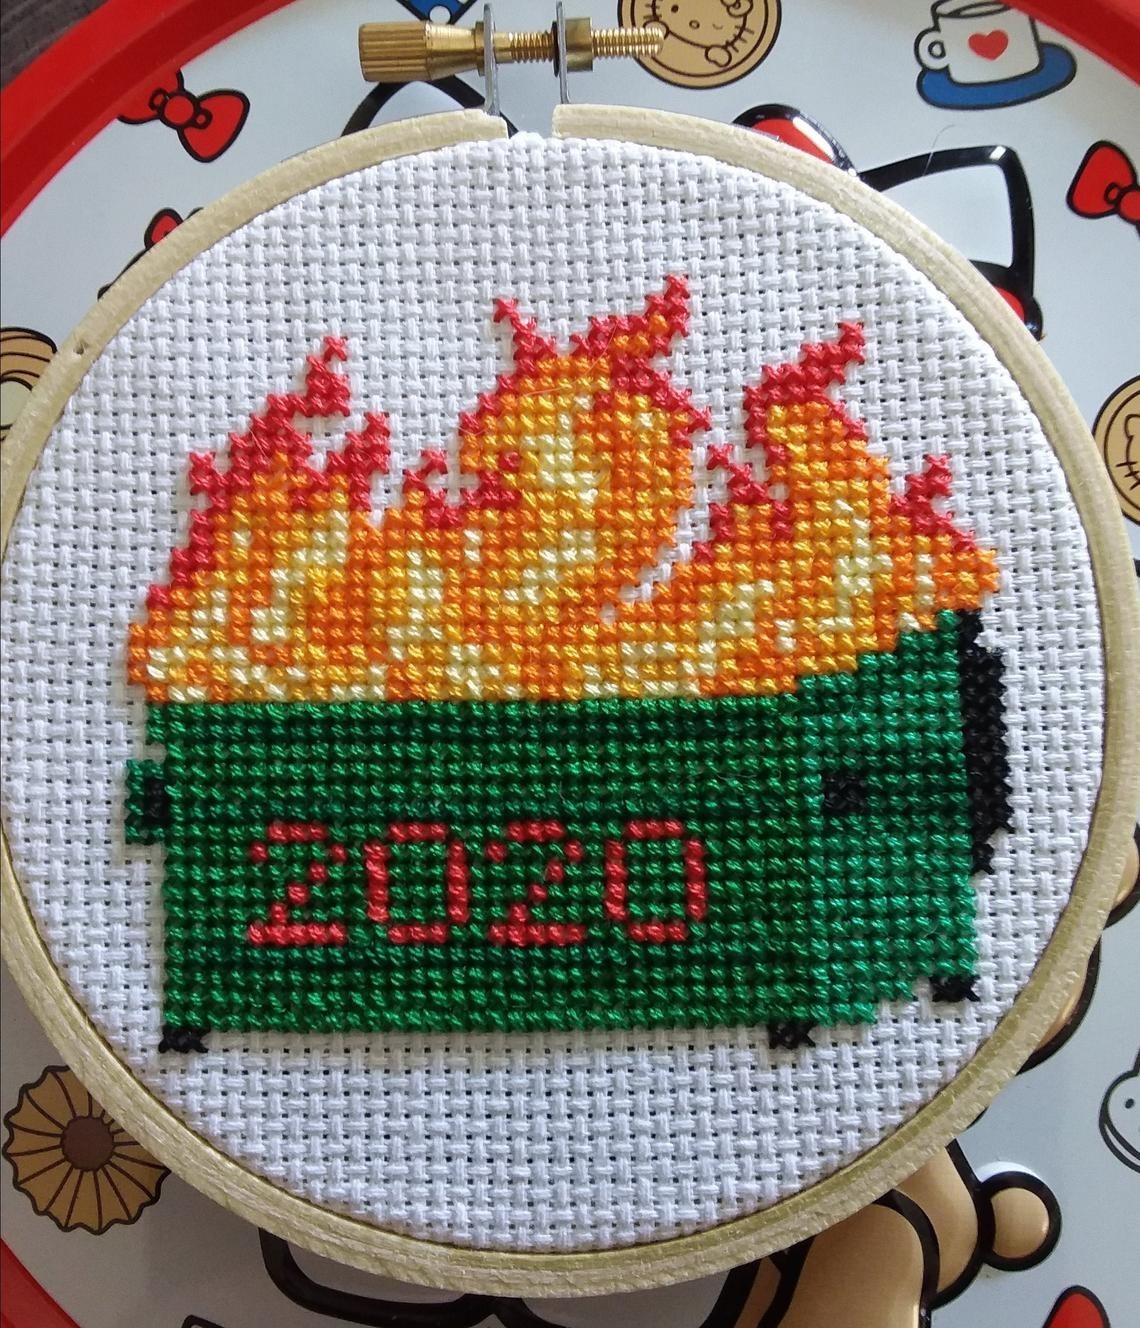 cross-stitch that looks like a dumpster on fire with 2020 on side